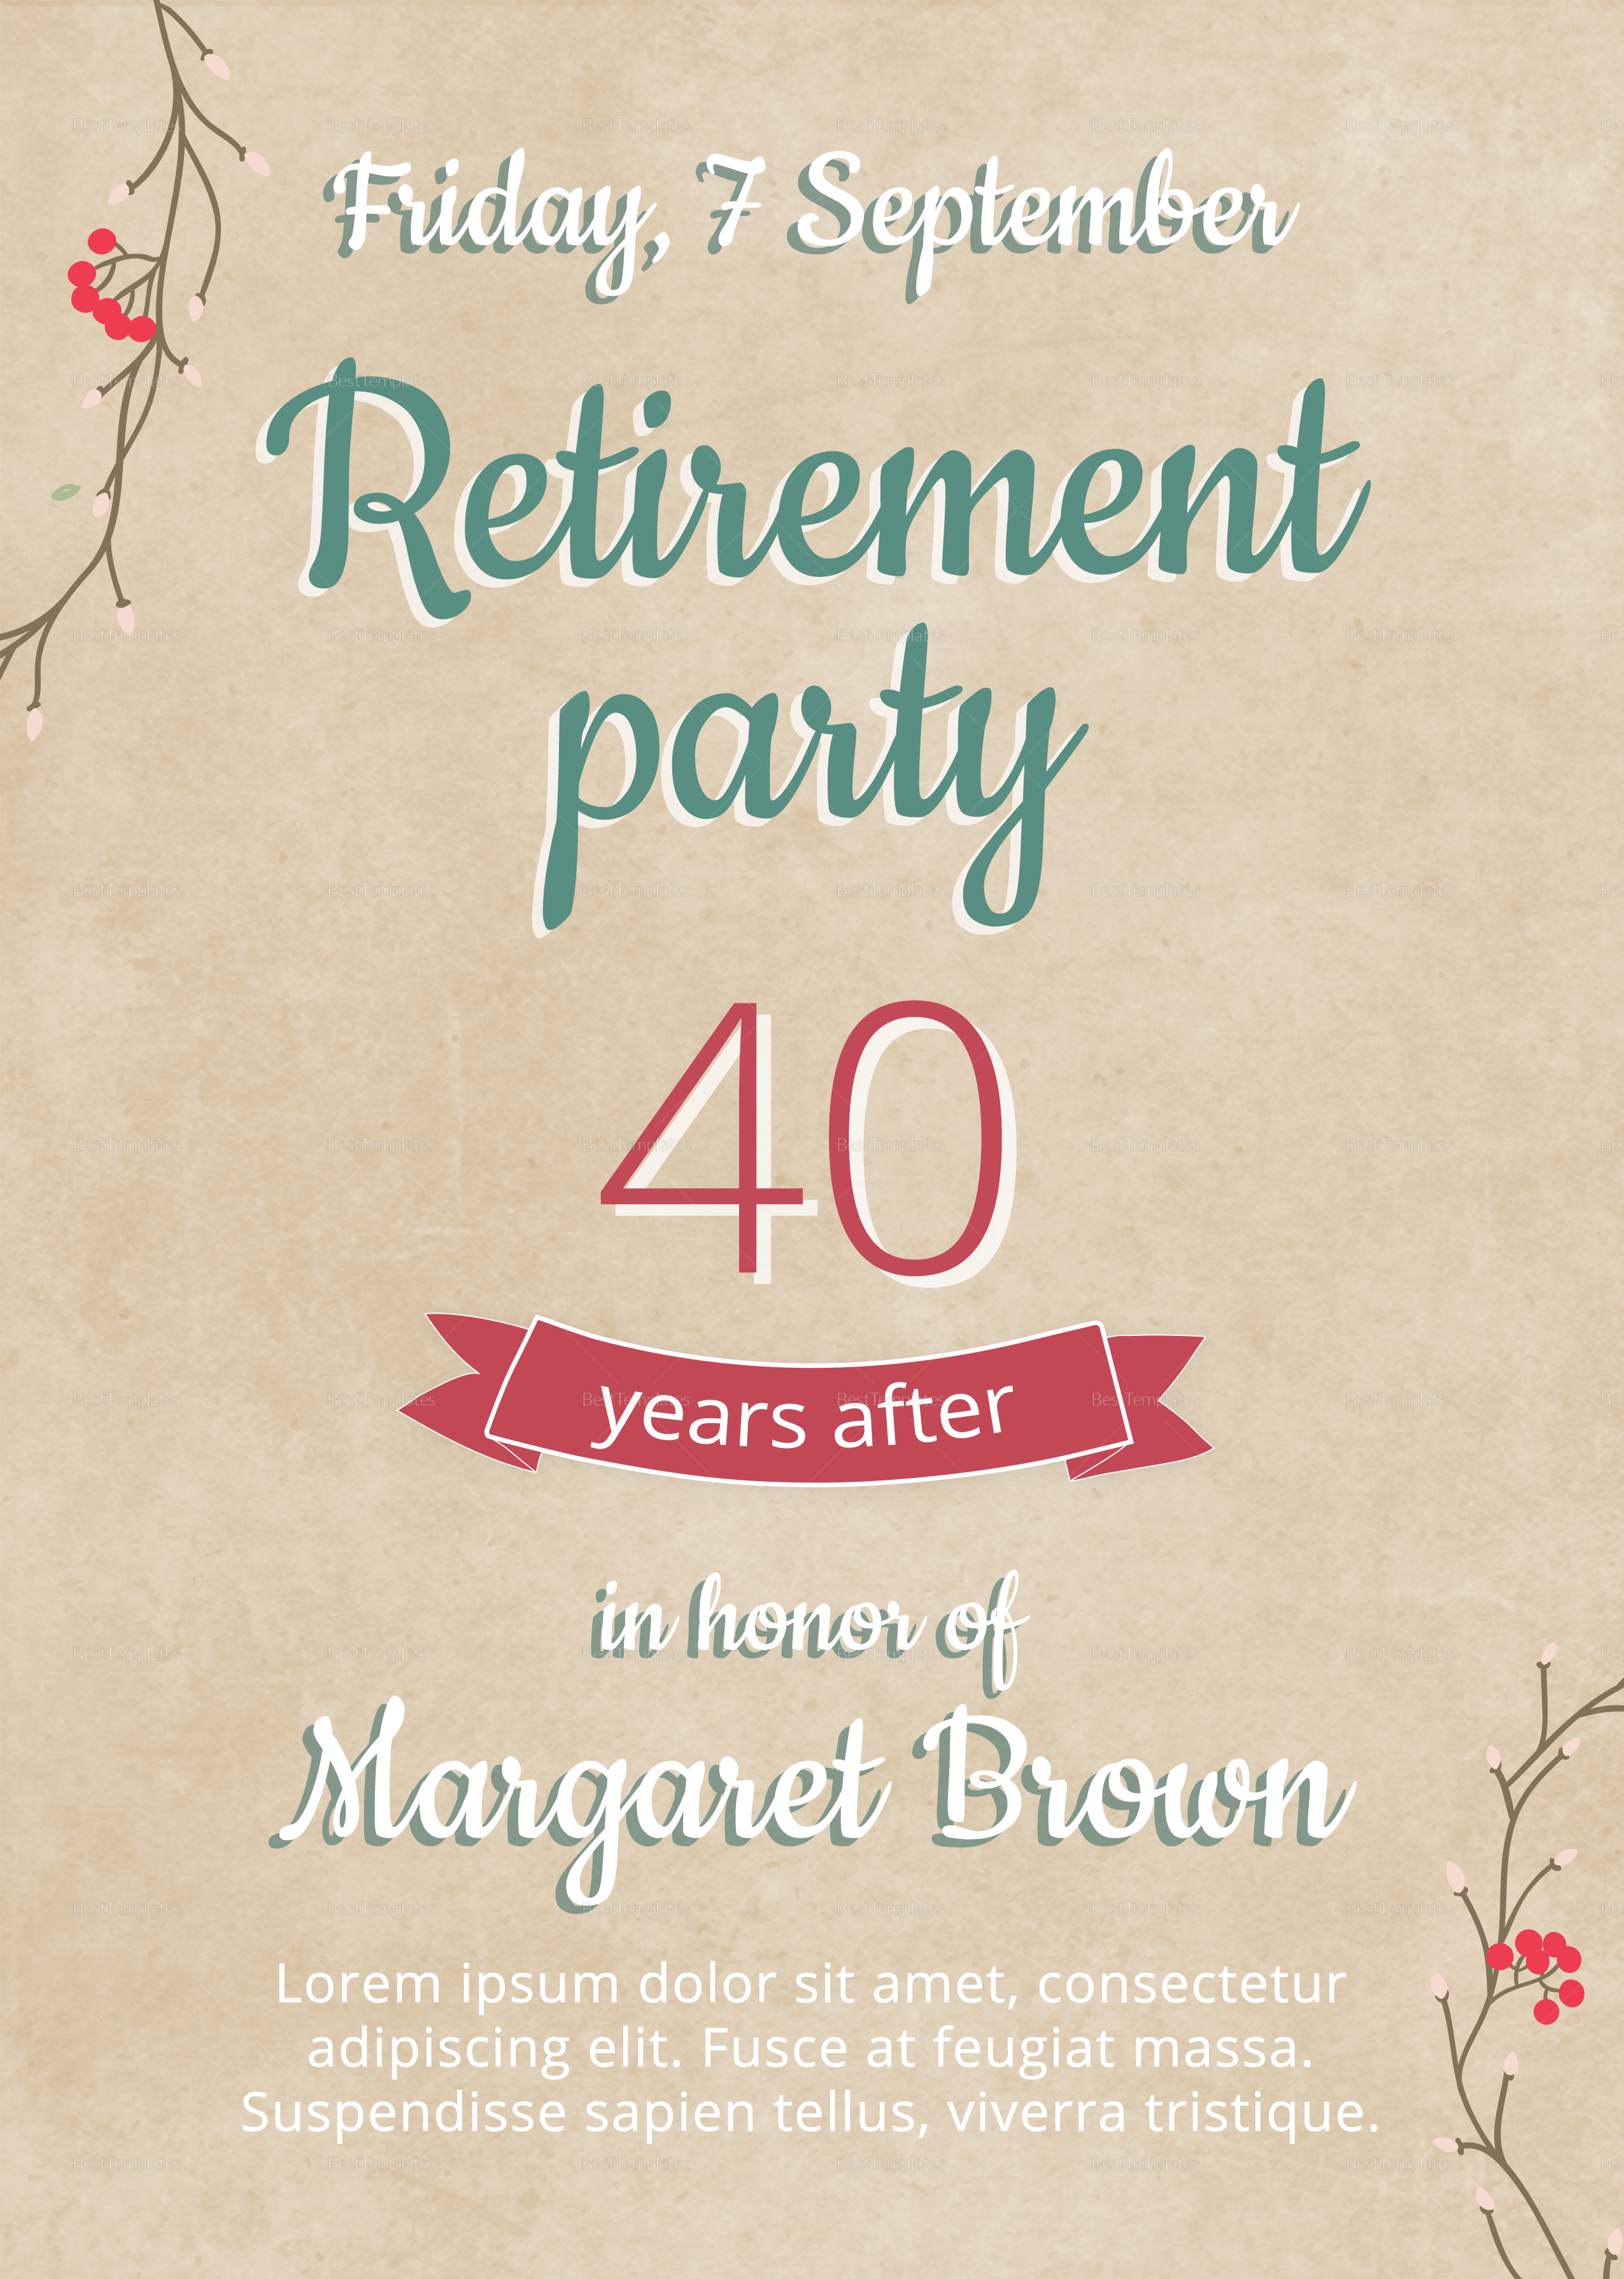 Retirement Party Flyer Template With Retirement Announcement Flyer Template In Retirement Announcement Flyer Template